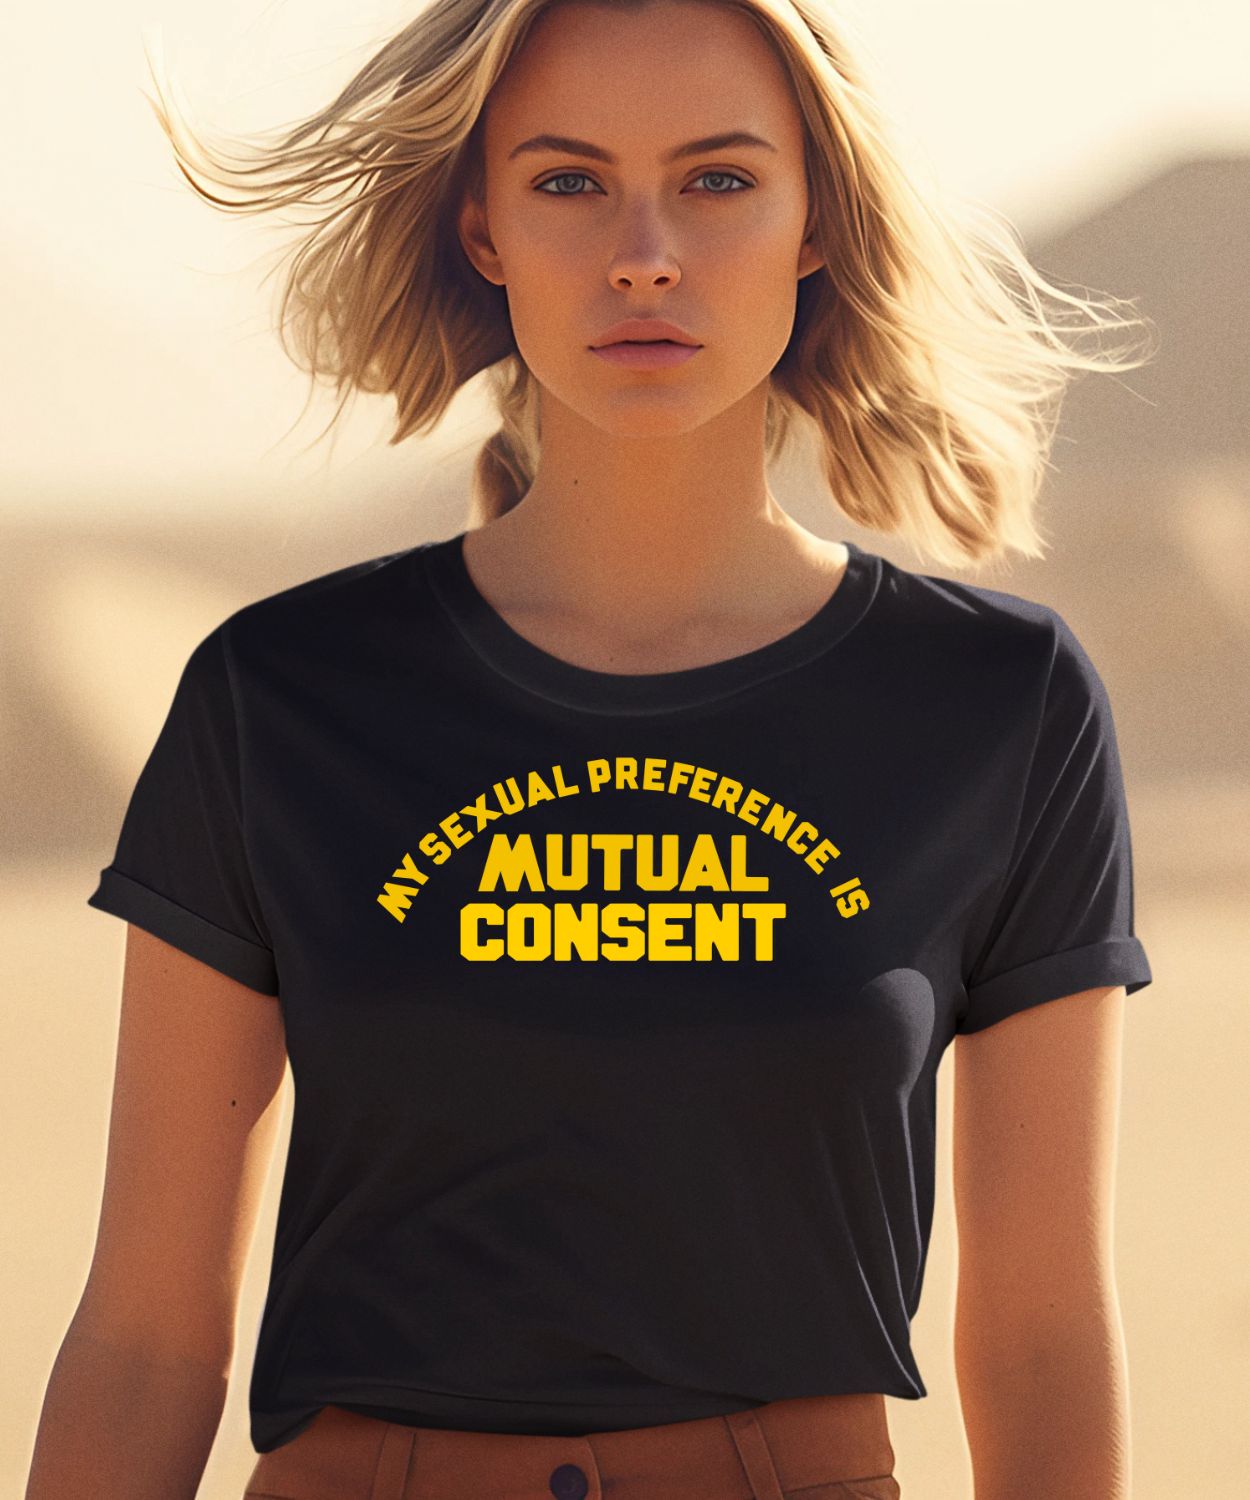 My Sexual Preference Is Mutual Consent Shirt